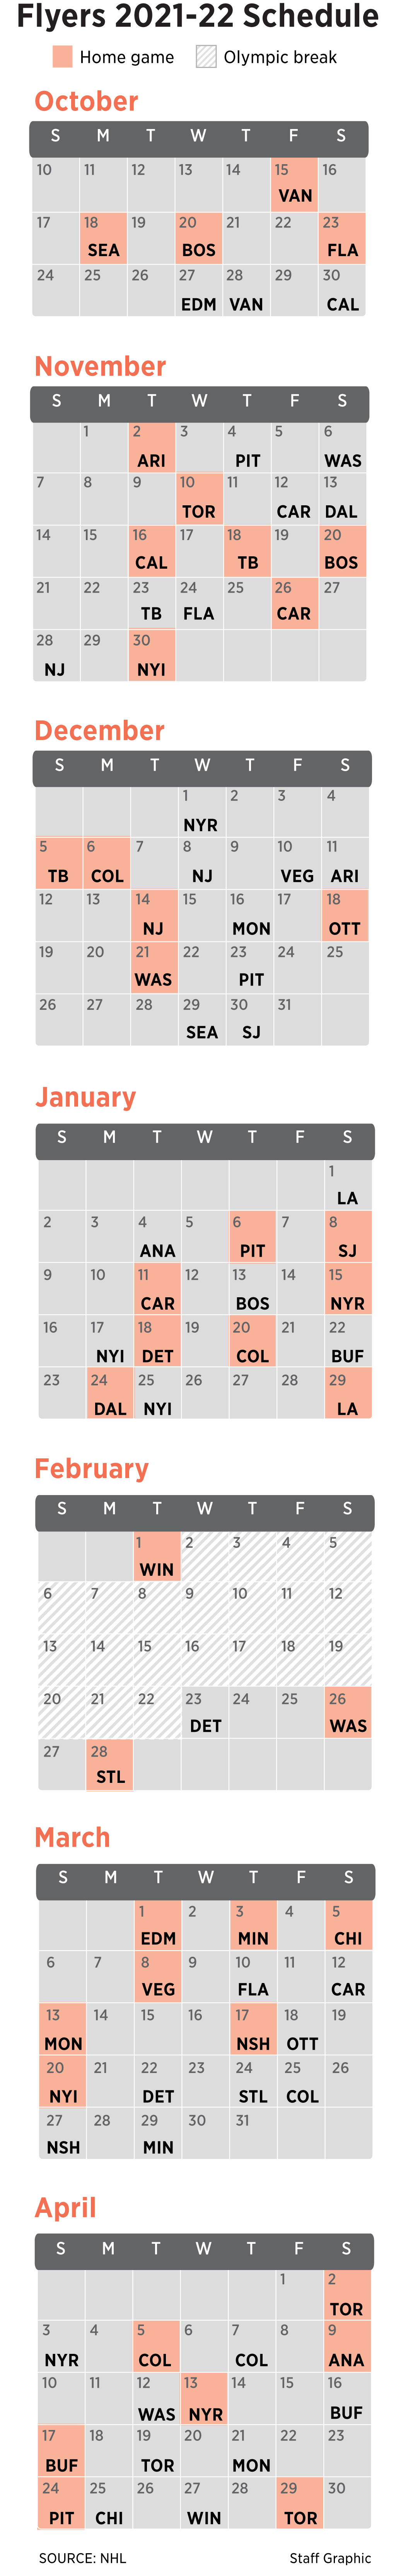 2021-22 Flyers Preview, schedule and 5 bold predictions - South